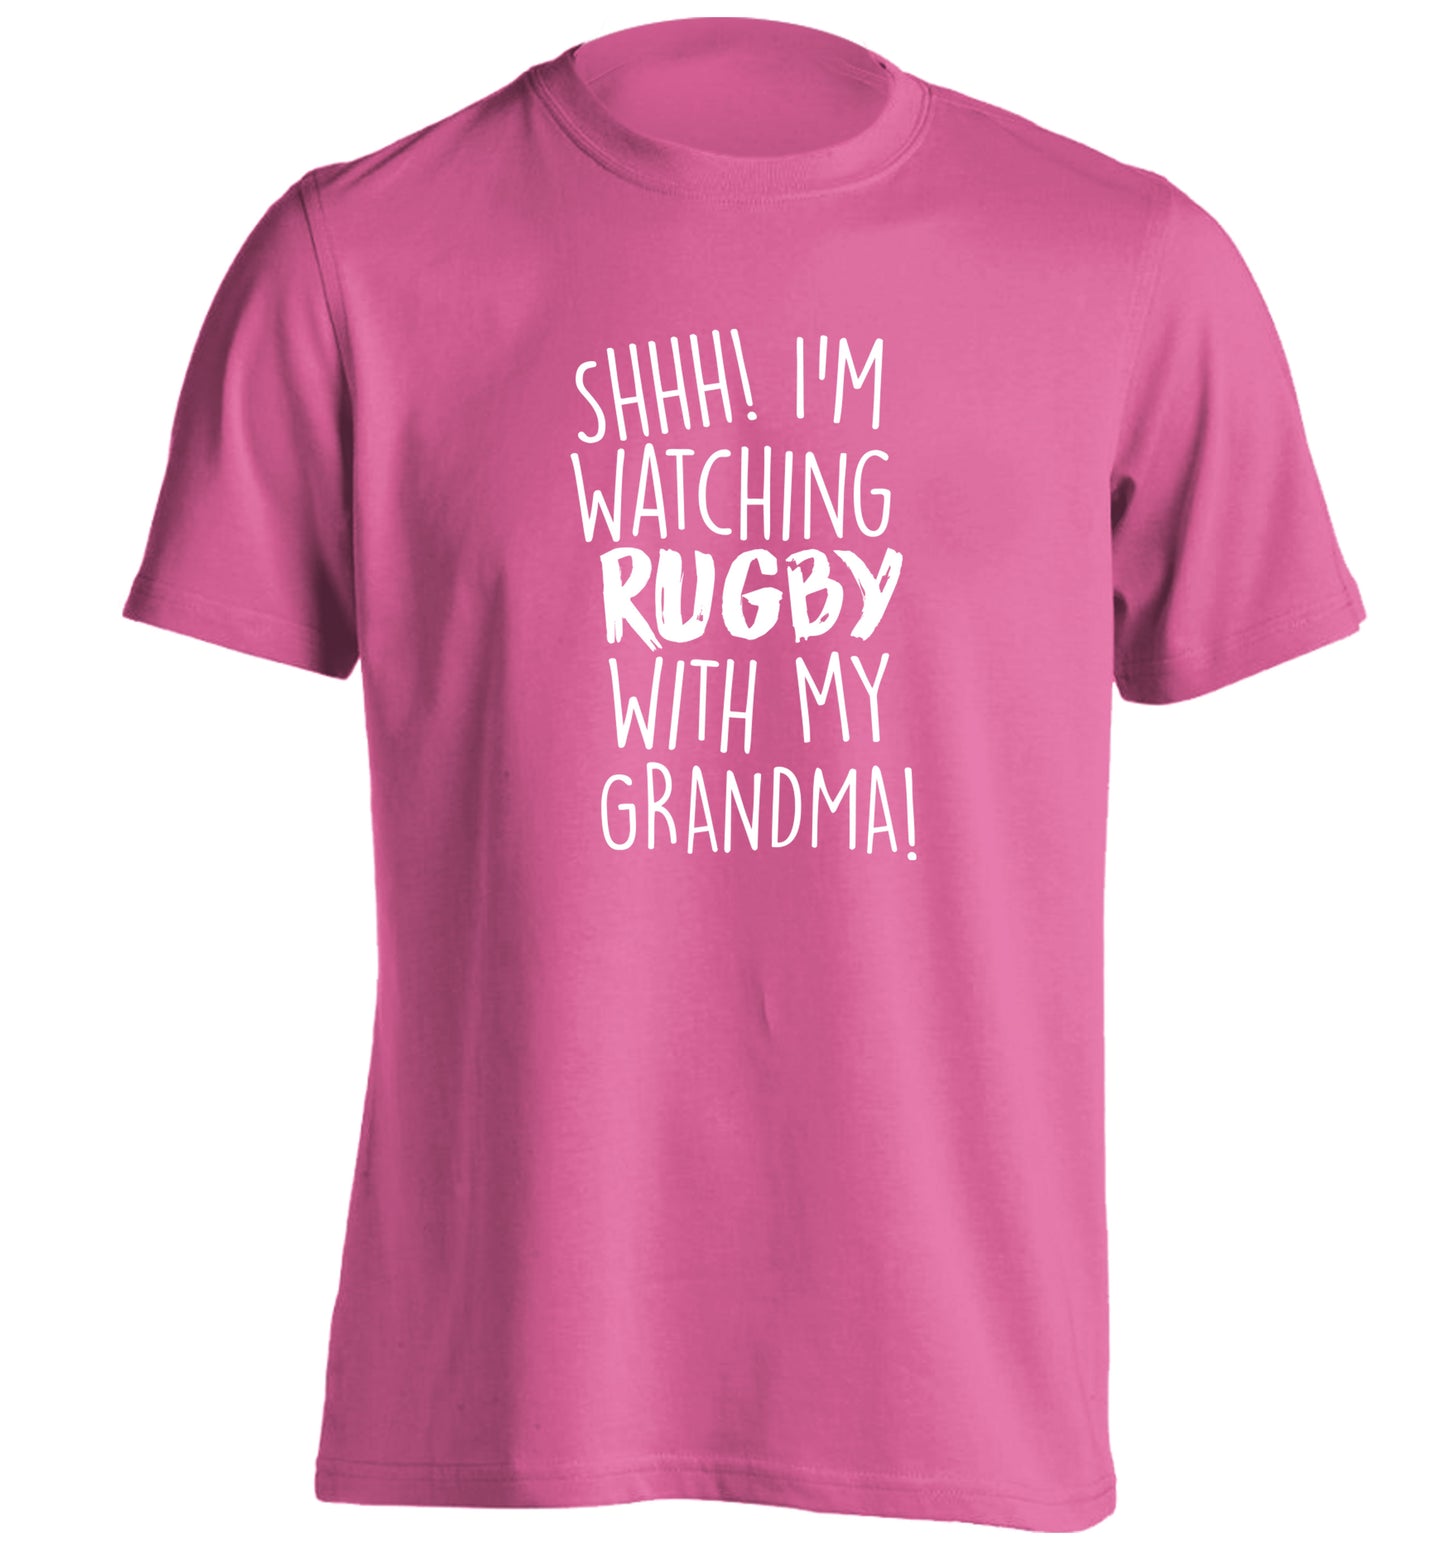 Shh I'm watching rugby with my grandma adults unisex pink Tshirt 2XL